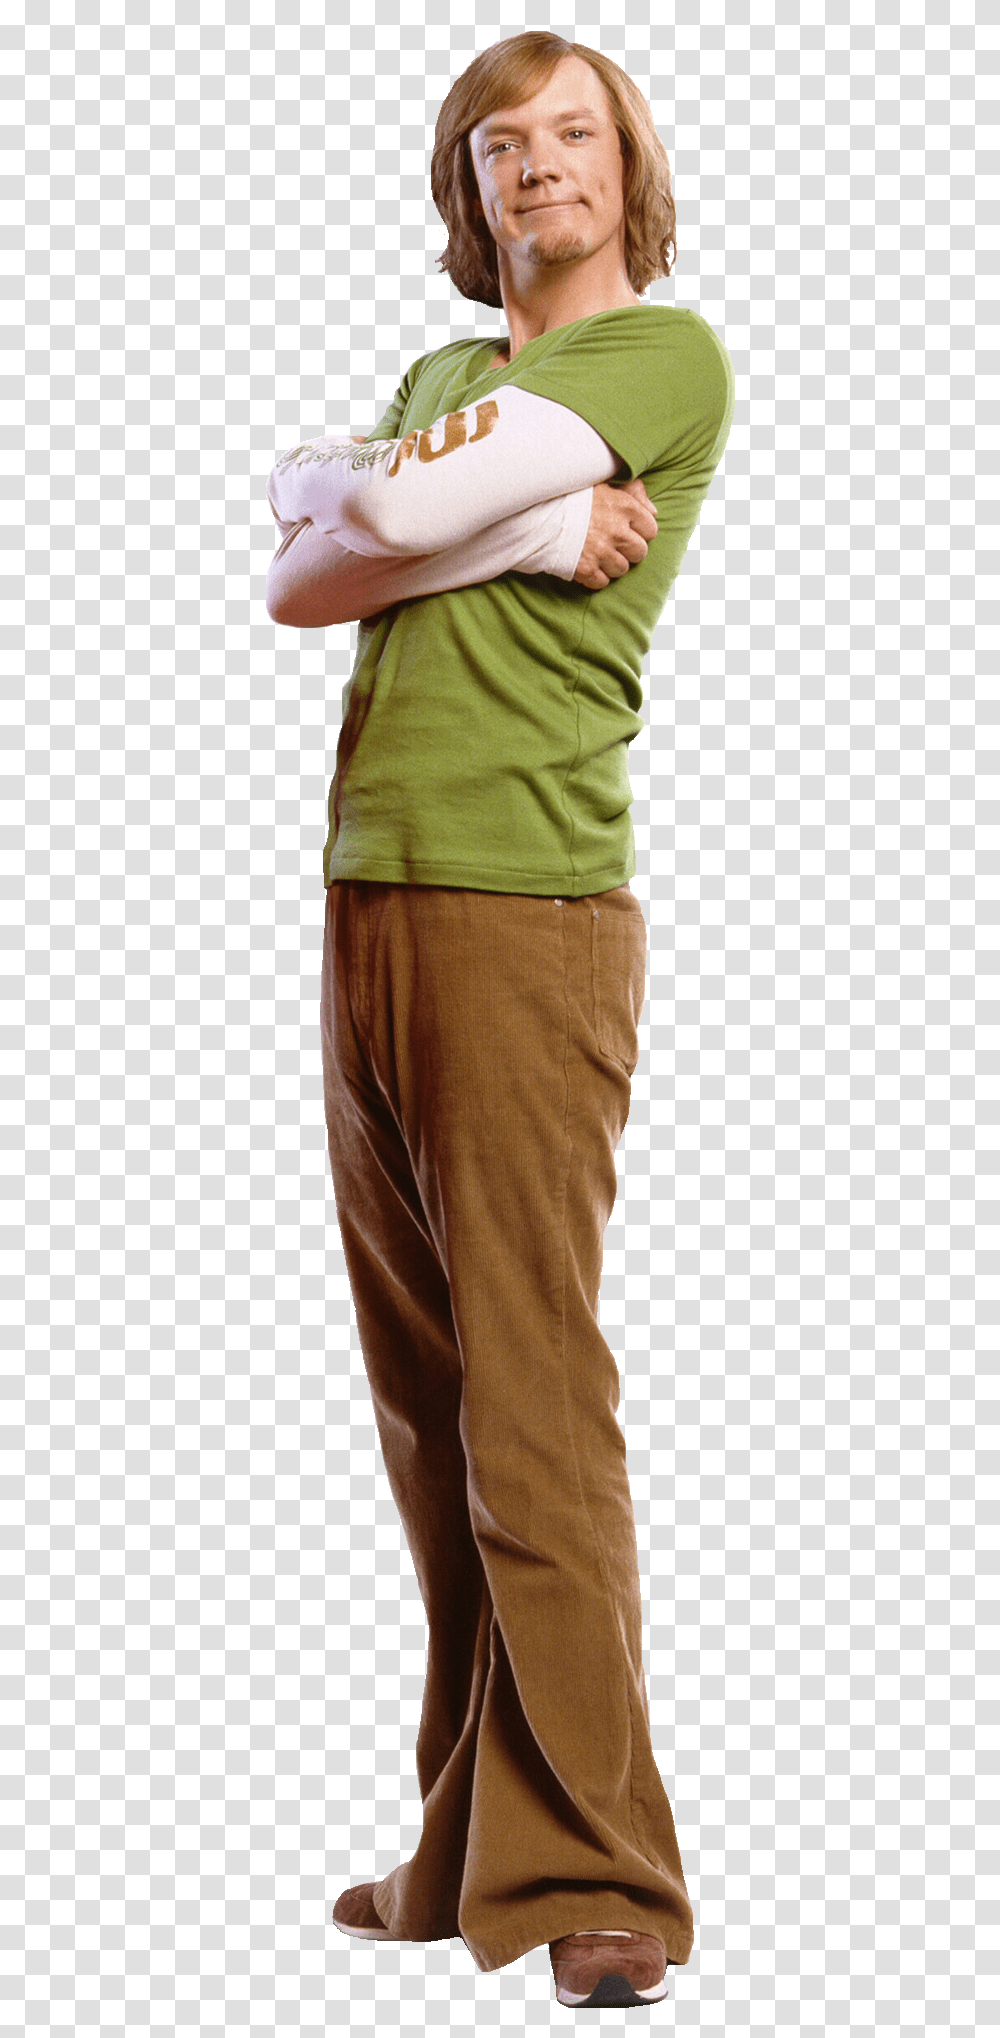 Scooby Doo 2 Download Daphne Scooby Doo, Person, Skirt, Pants Transparent Png